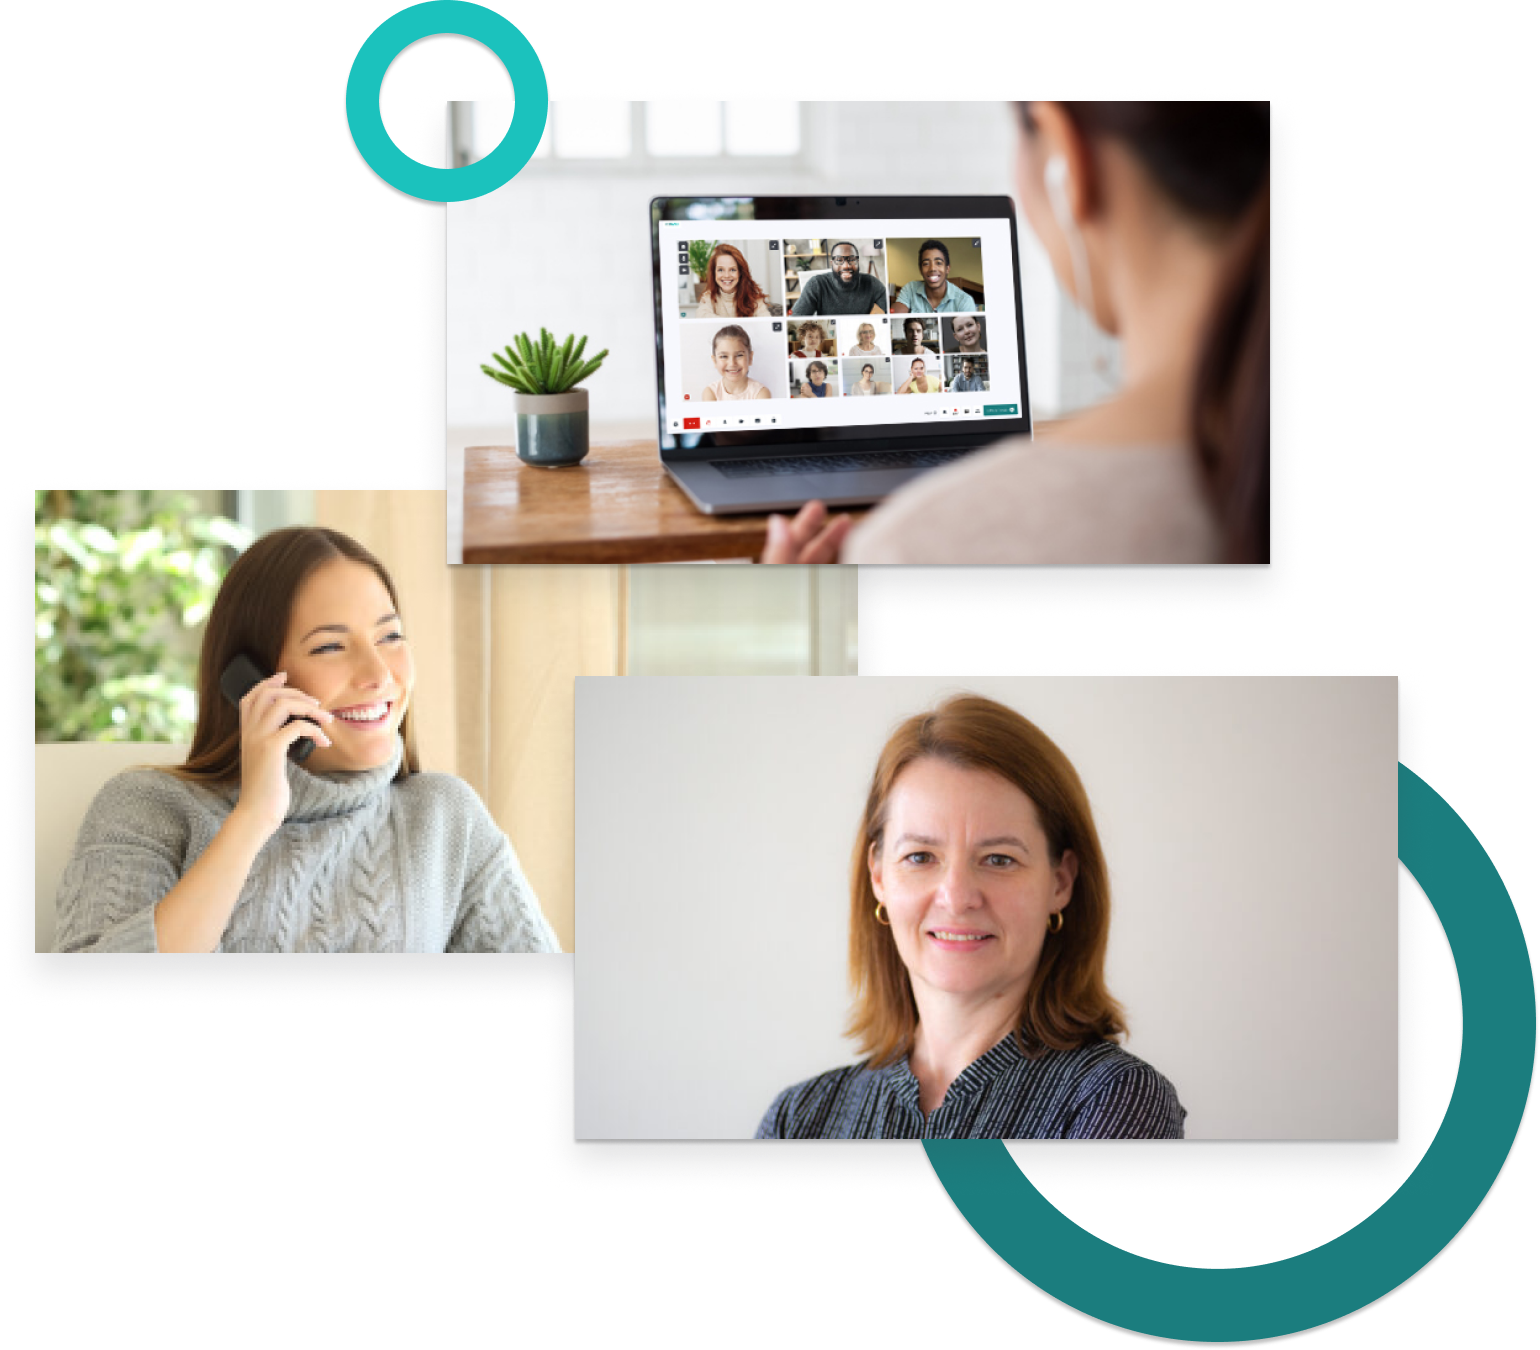 Elevated Telehealth: A Virtual Care Engagement Platform with Silvia Pfeiffer